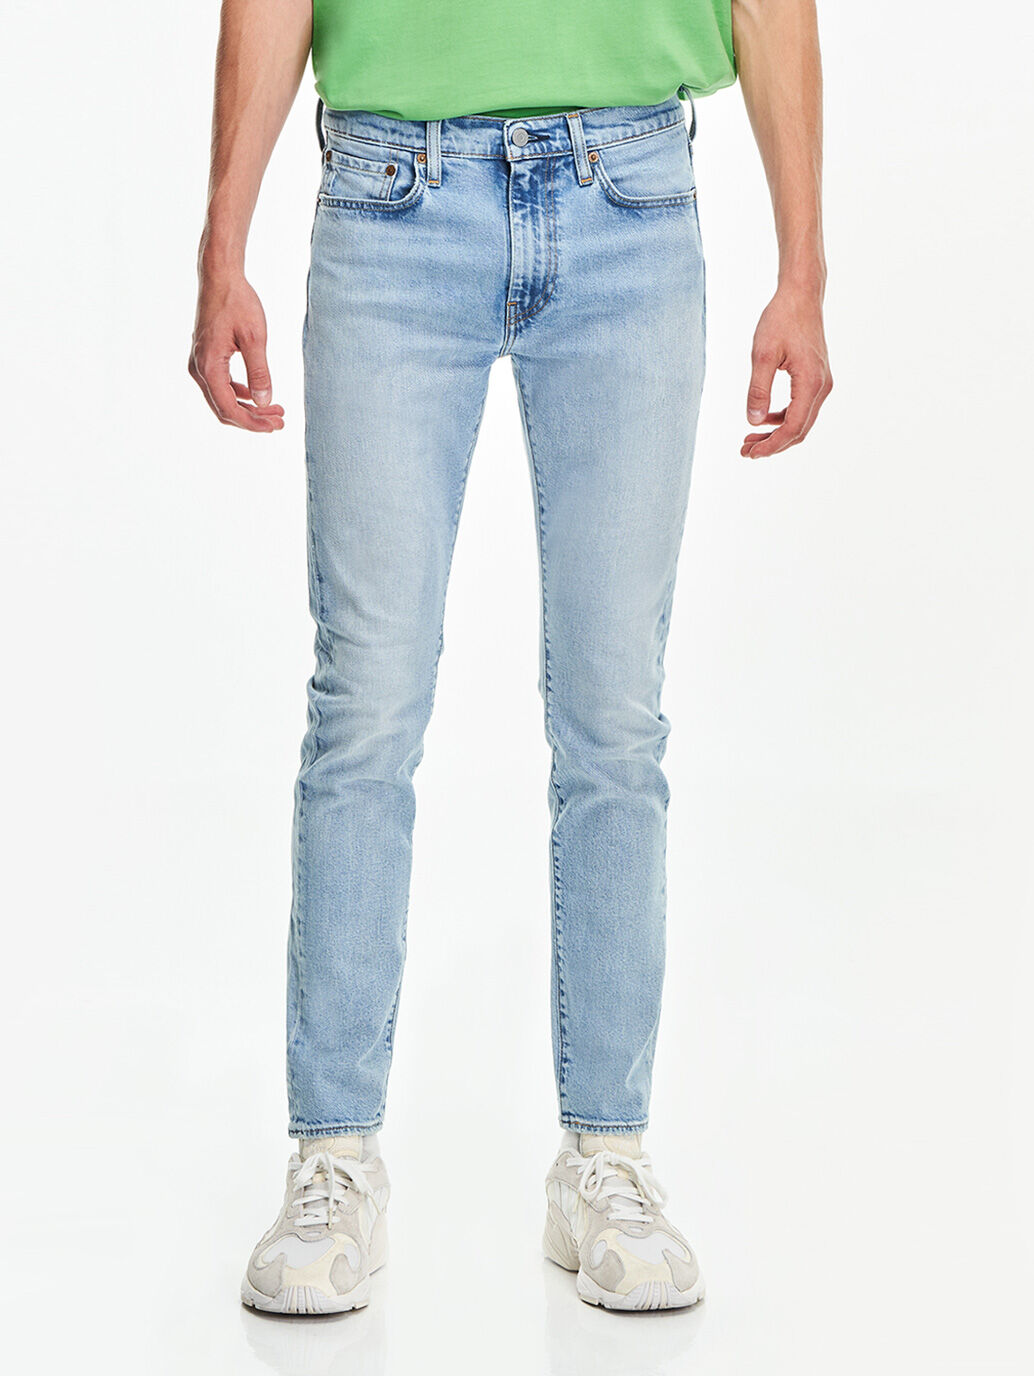 New!! Size: Varies Levi's 510 Boys Skinny-Fit Stretch JeansTurquoise 